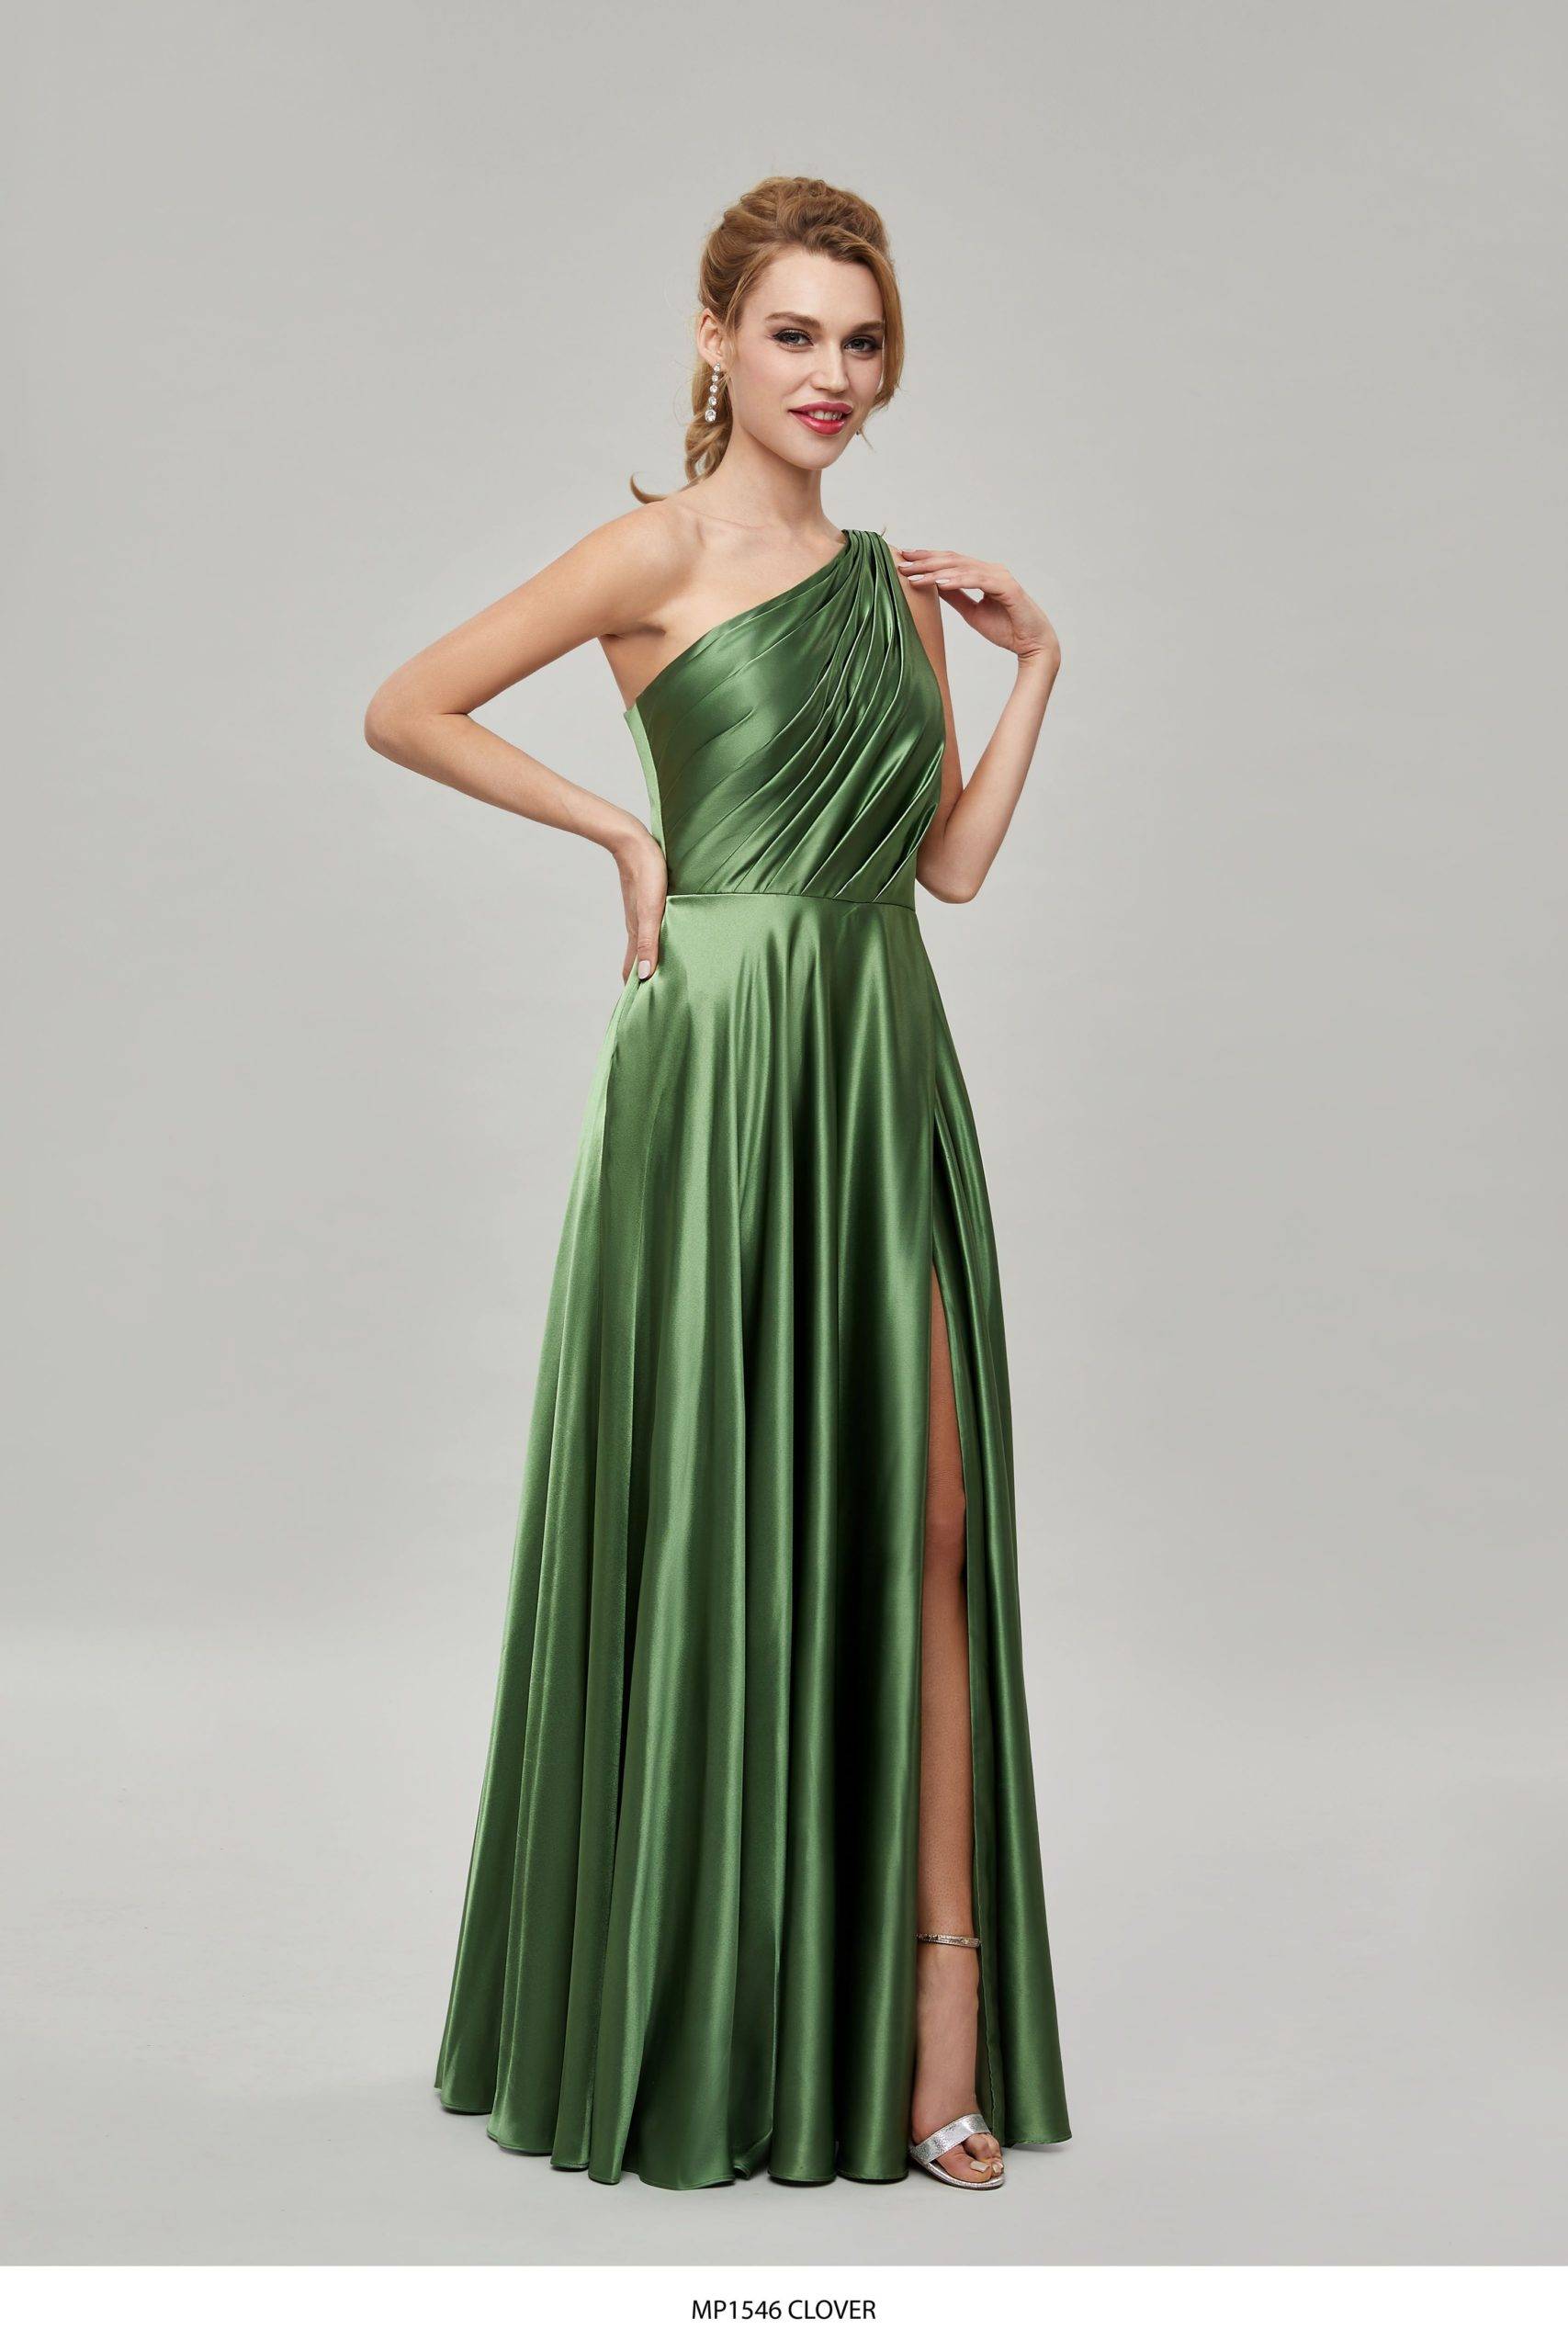 MP1546 Dress by Moir Formal & Bridesmaid Moir Endless colour choices! We will confirm colour choice shortly -- for now, select Size : 2|4|6|8|10|12|14|16|18|20|22|24|26|28|30 